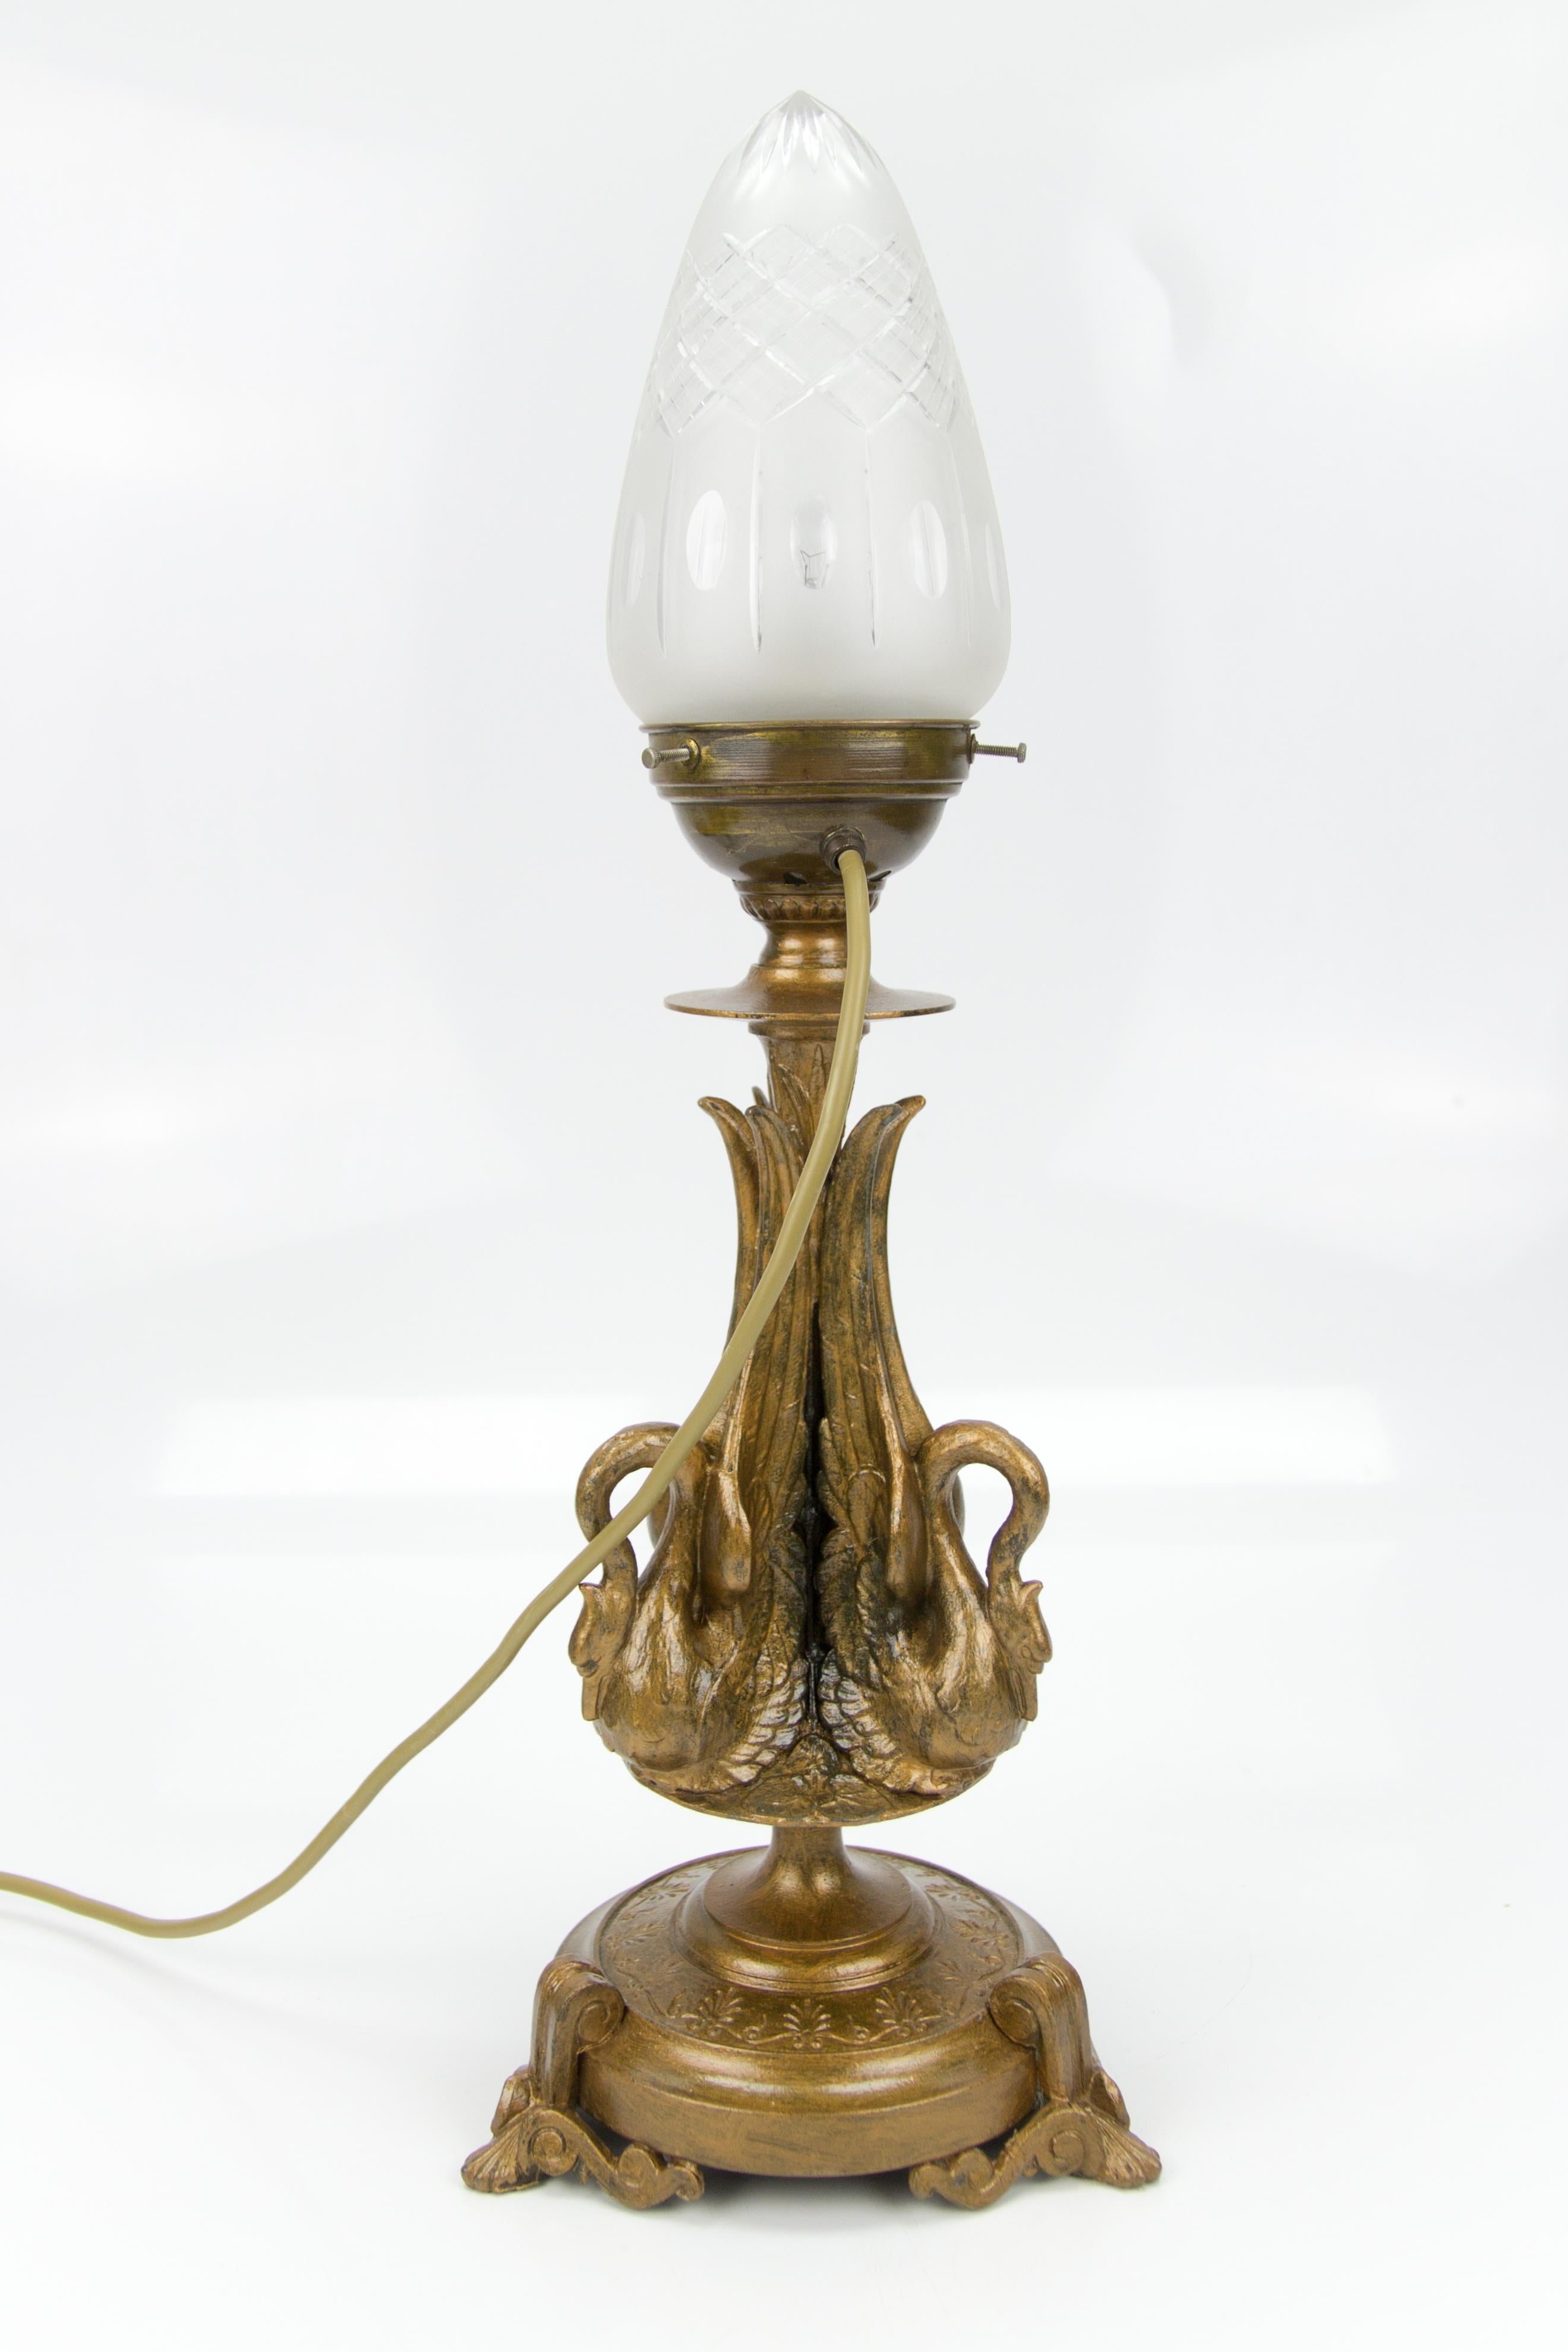 French Empire Style Bronze-Colored Pewter and Frosted Cut Glass Table Lamp 1900s For Sale 7